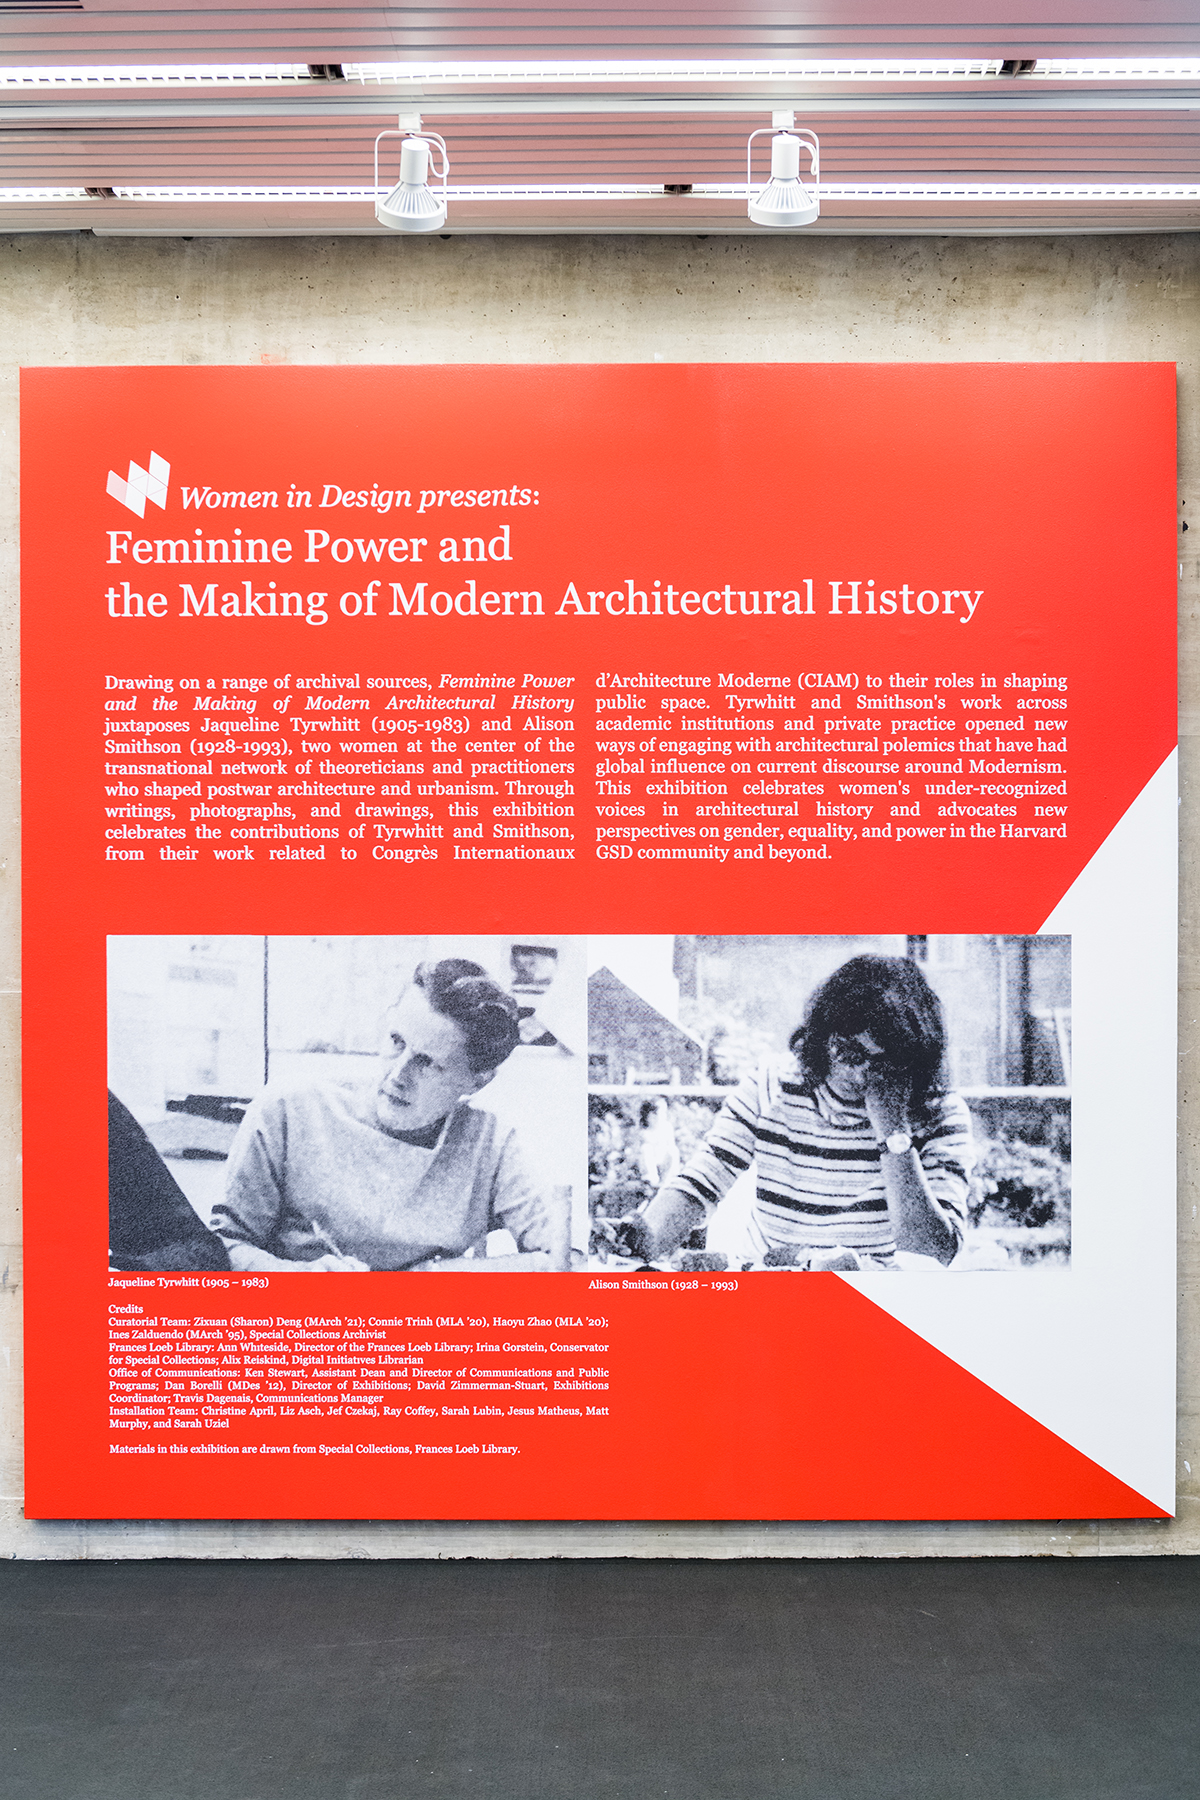 Feminine Power and the Making of Modern Architectural History